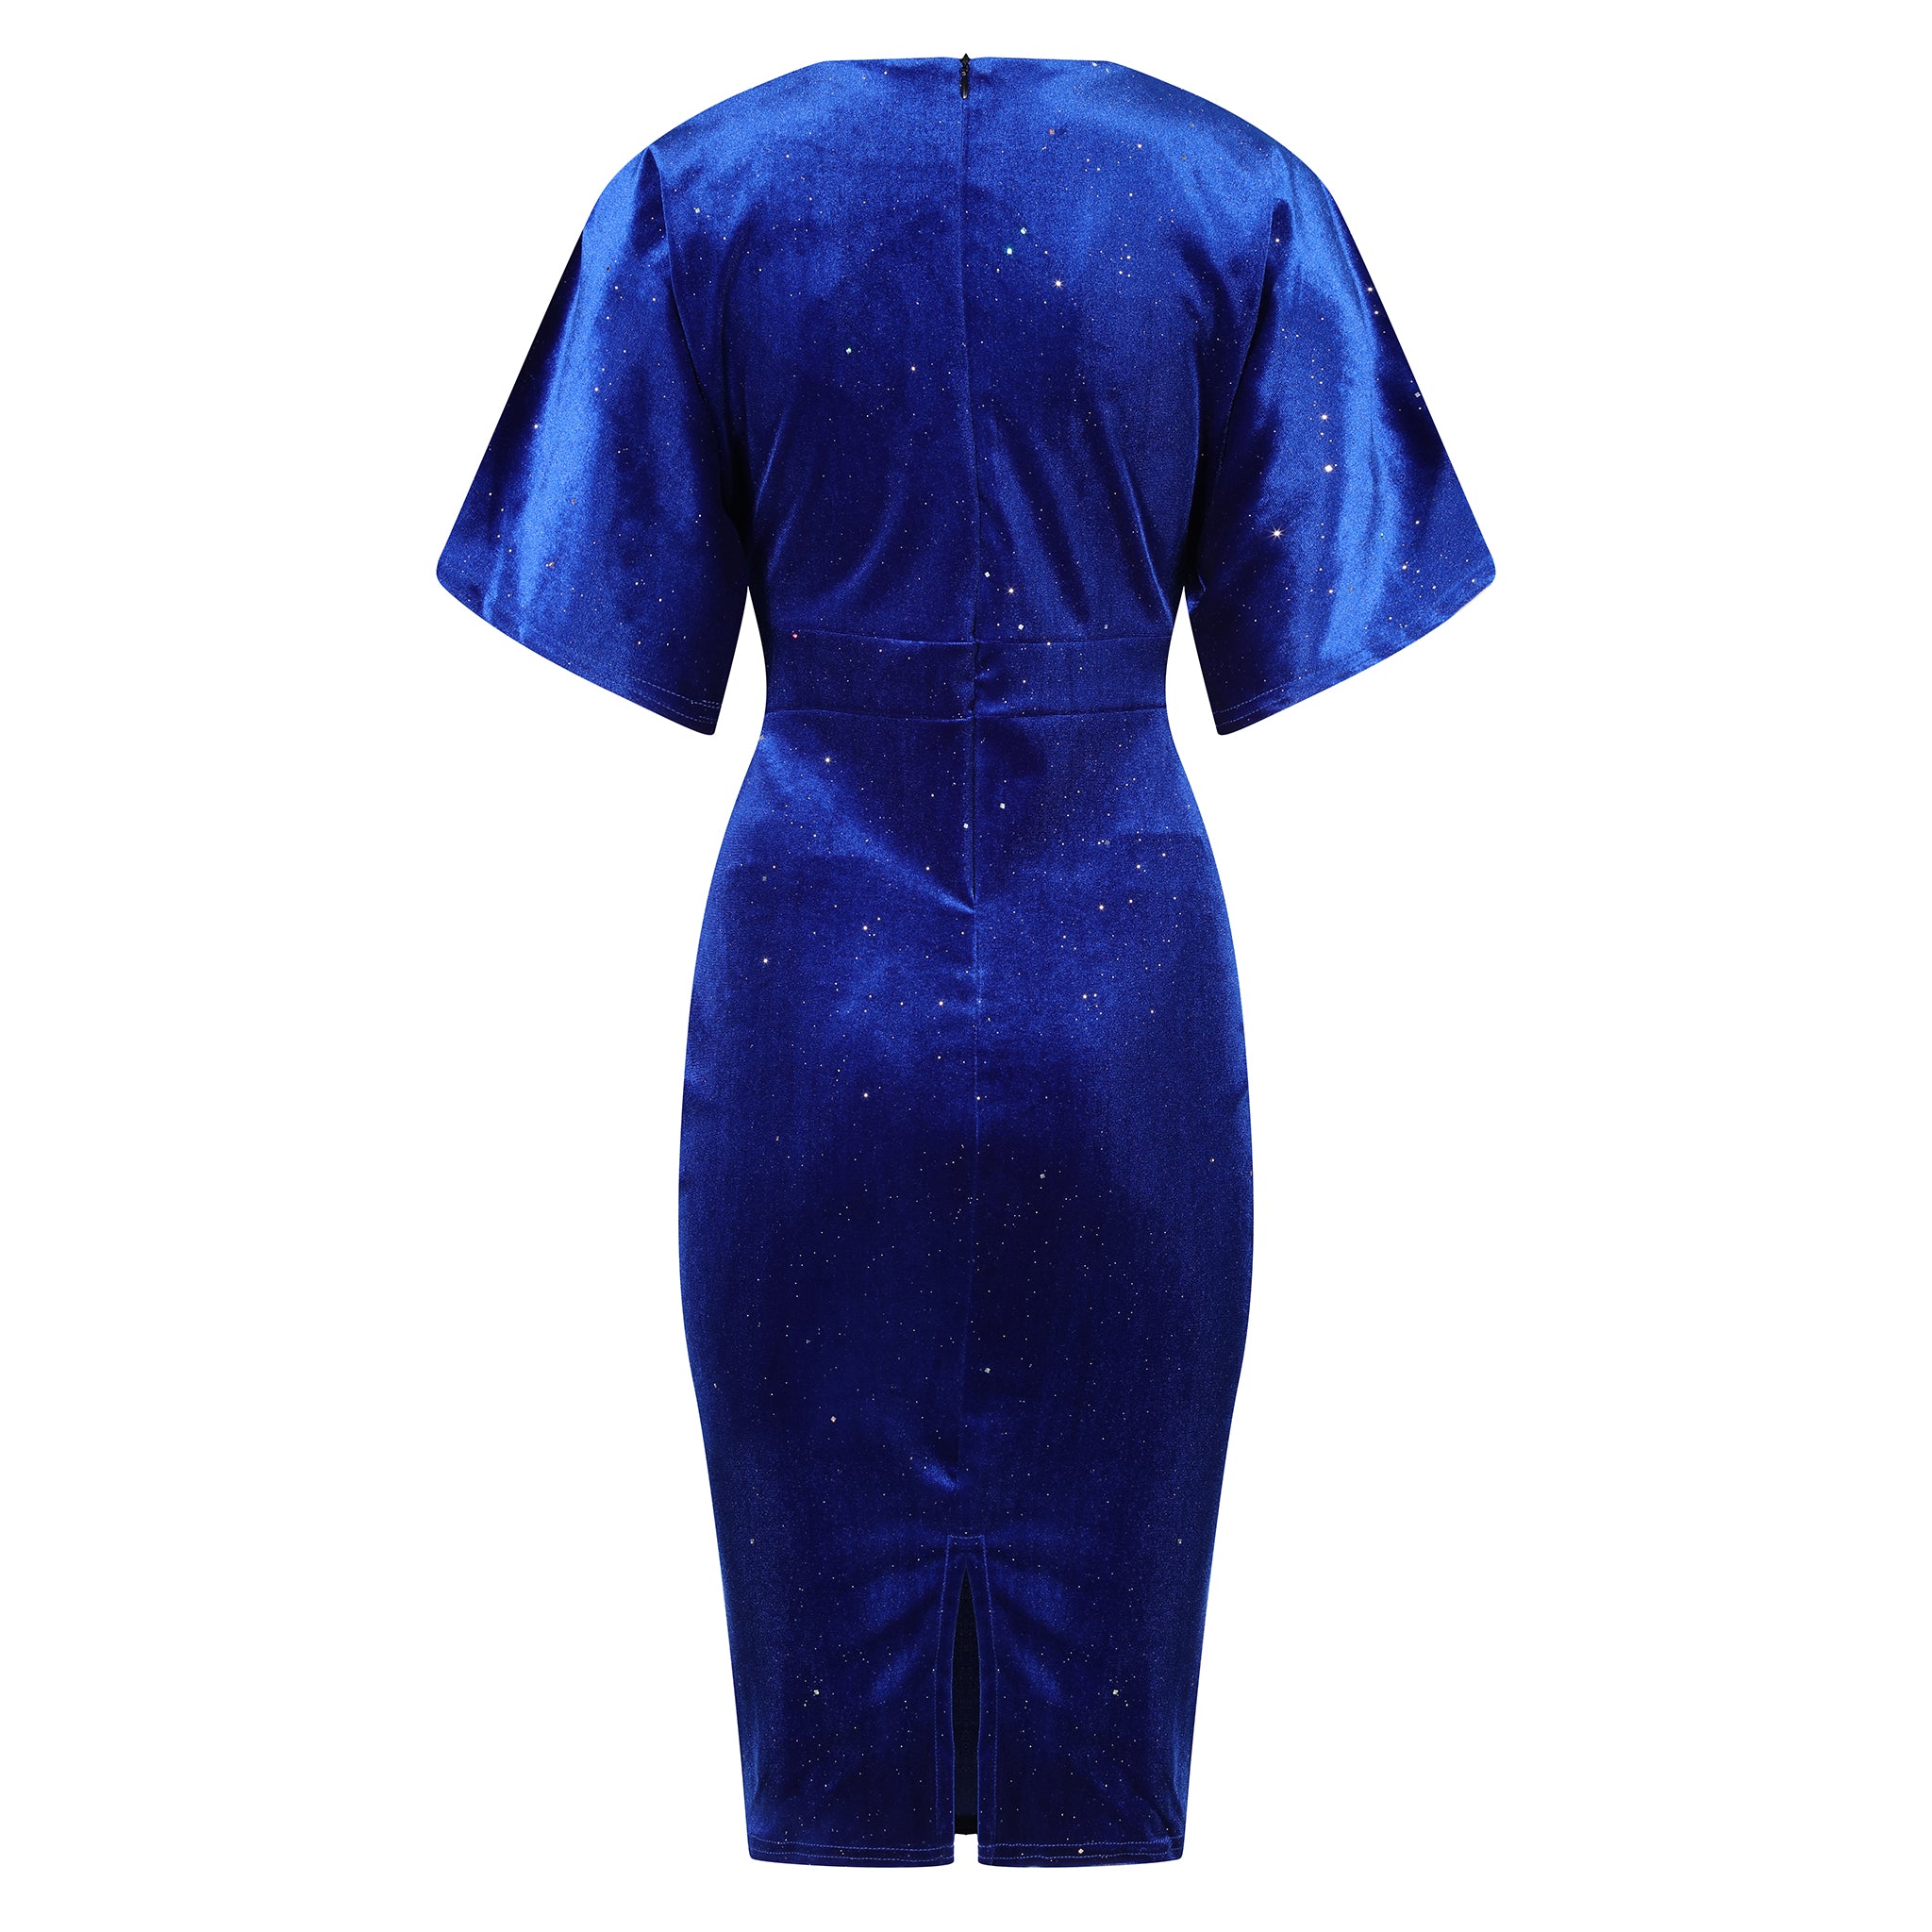 Royal Blue Velour Glitter Sparkle Half Batwing Sleeve Crossover Top Wiggle Dress